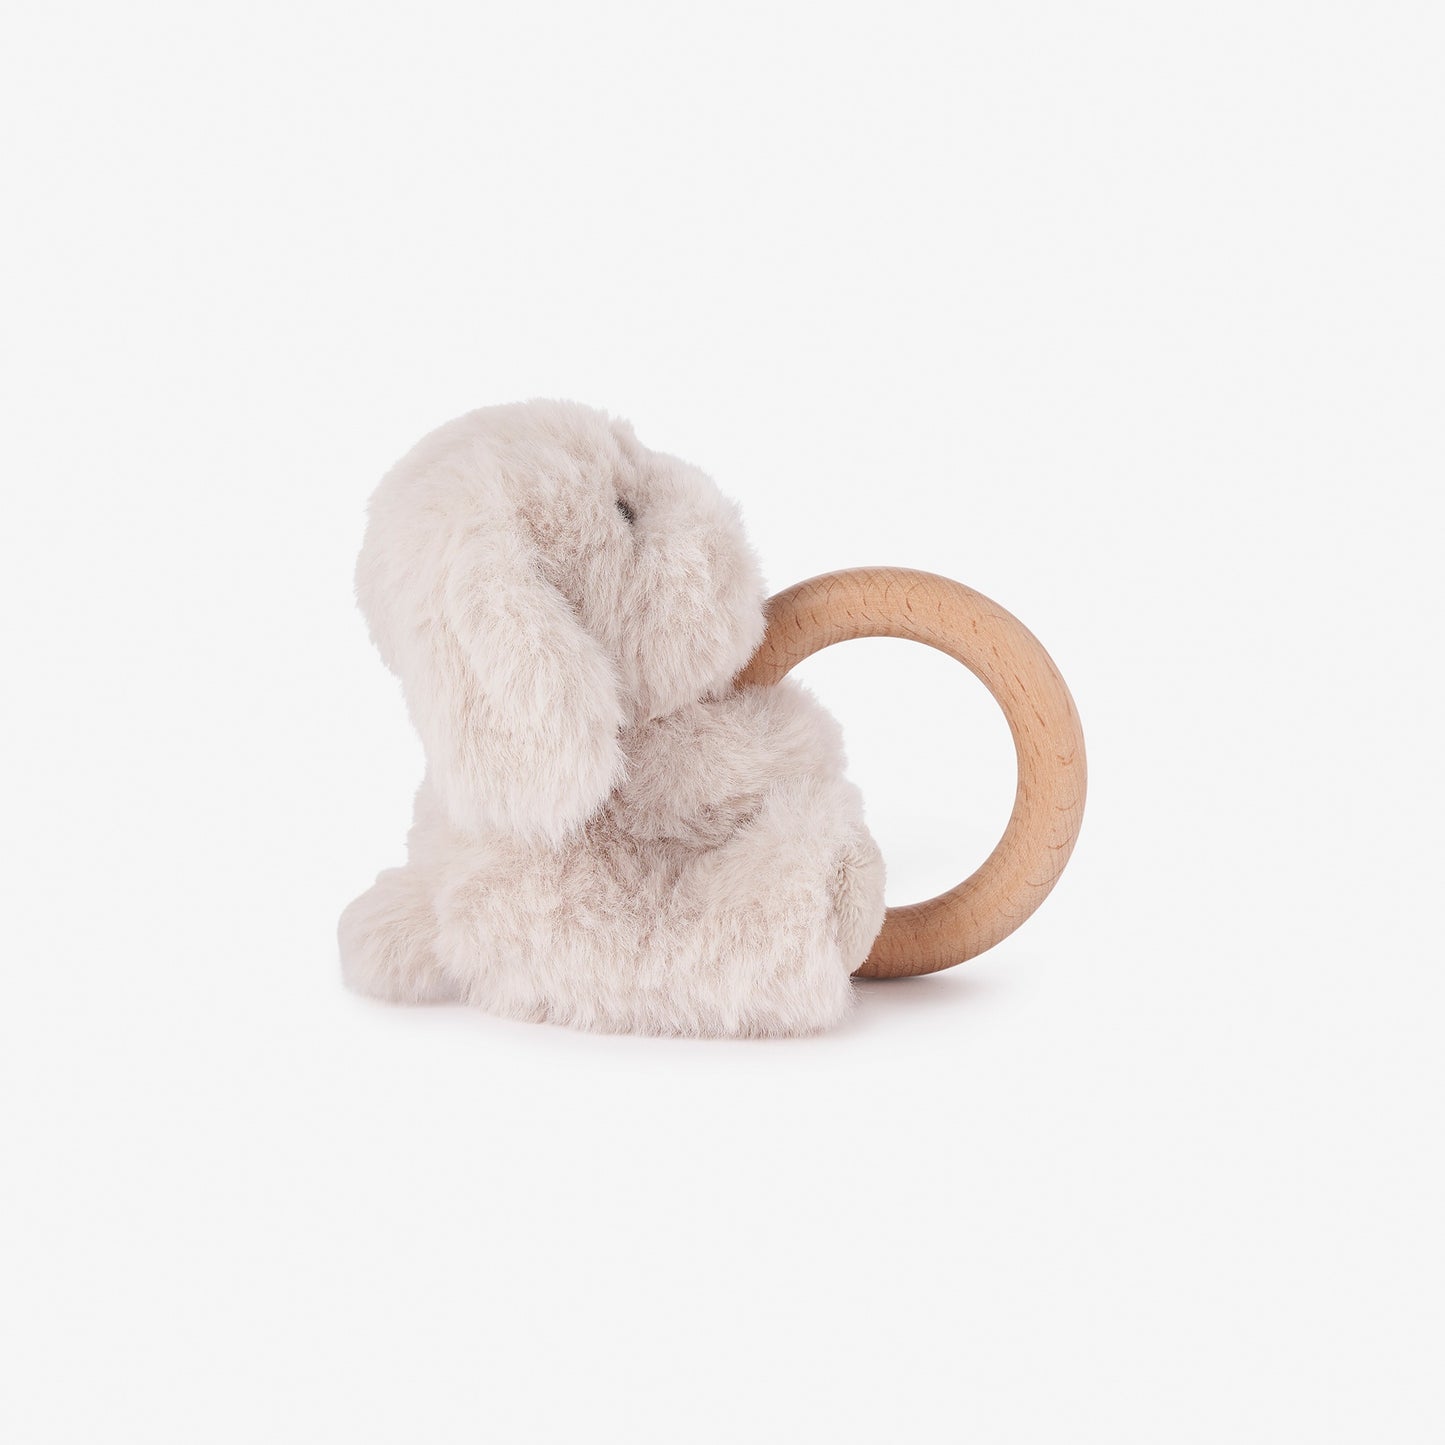 Puppy Plush Wooden Ring Rattle